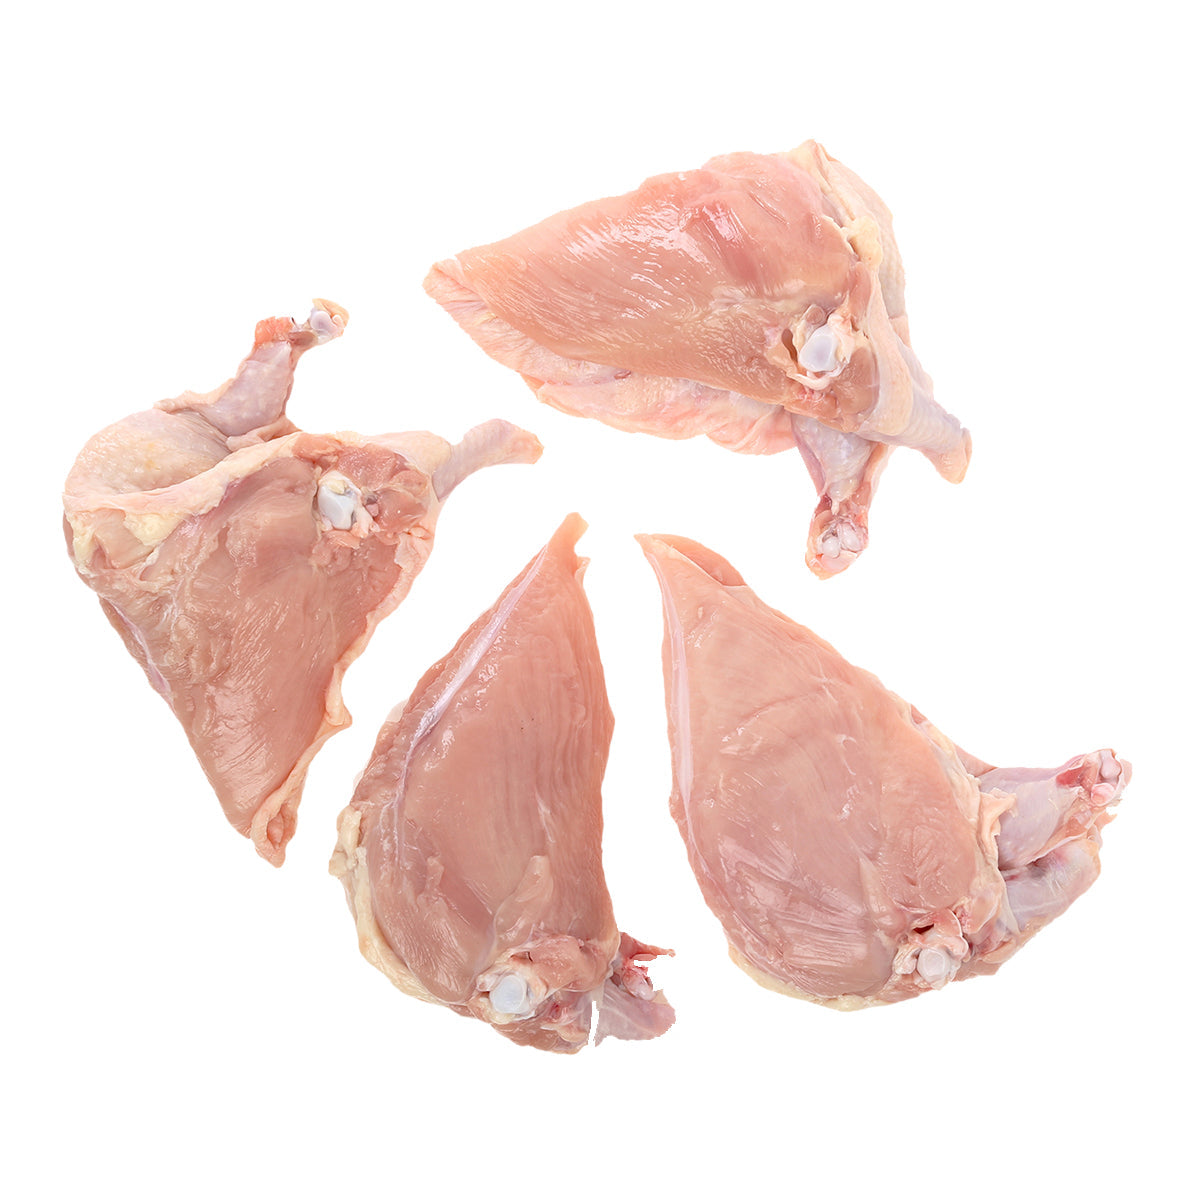 Mennella'S Poultry Co. ABF French Airline Breast 10 oz